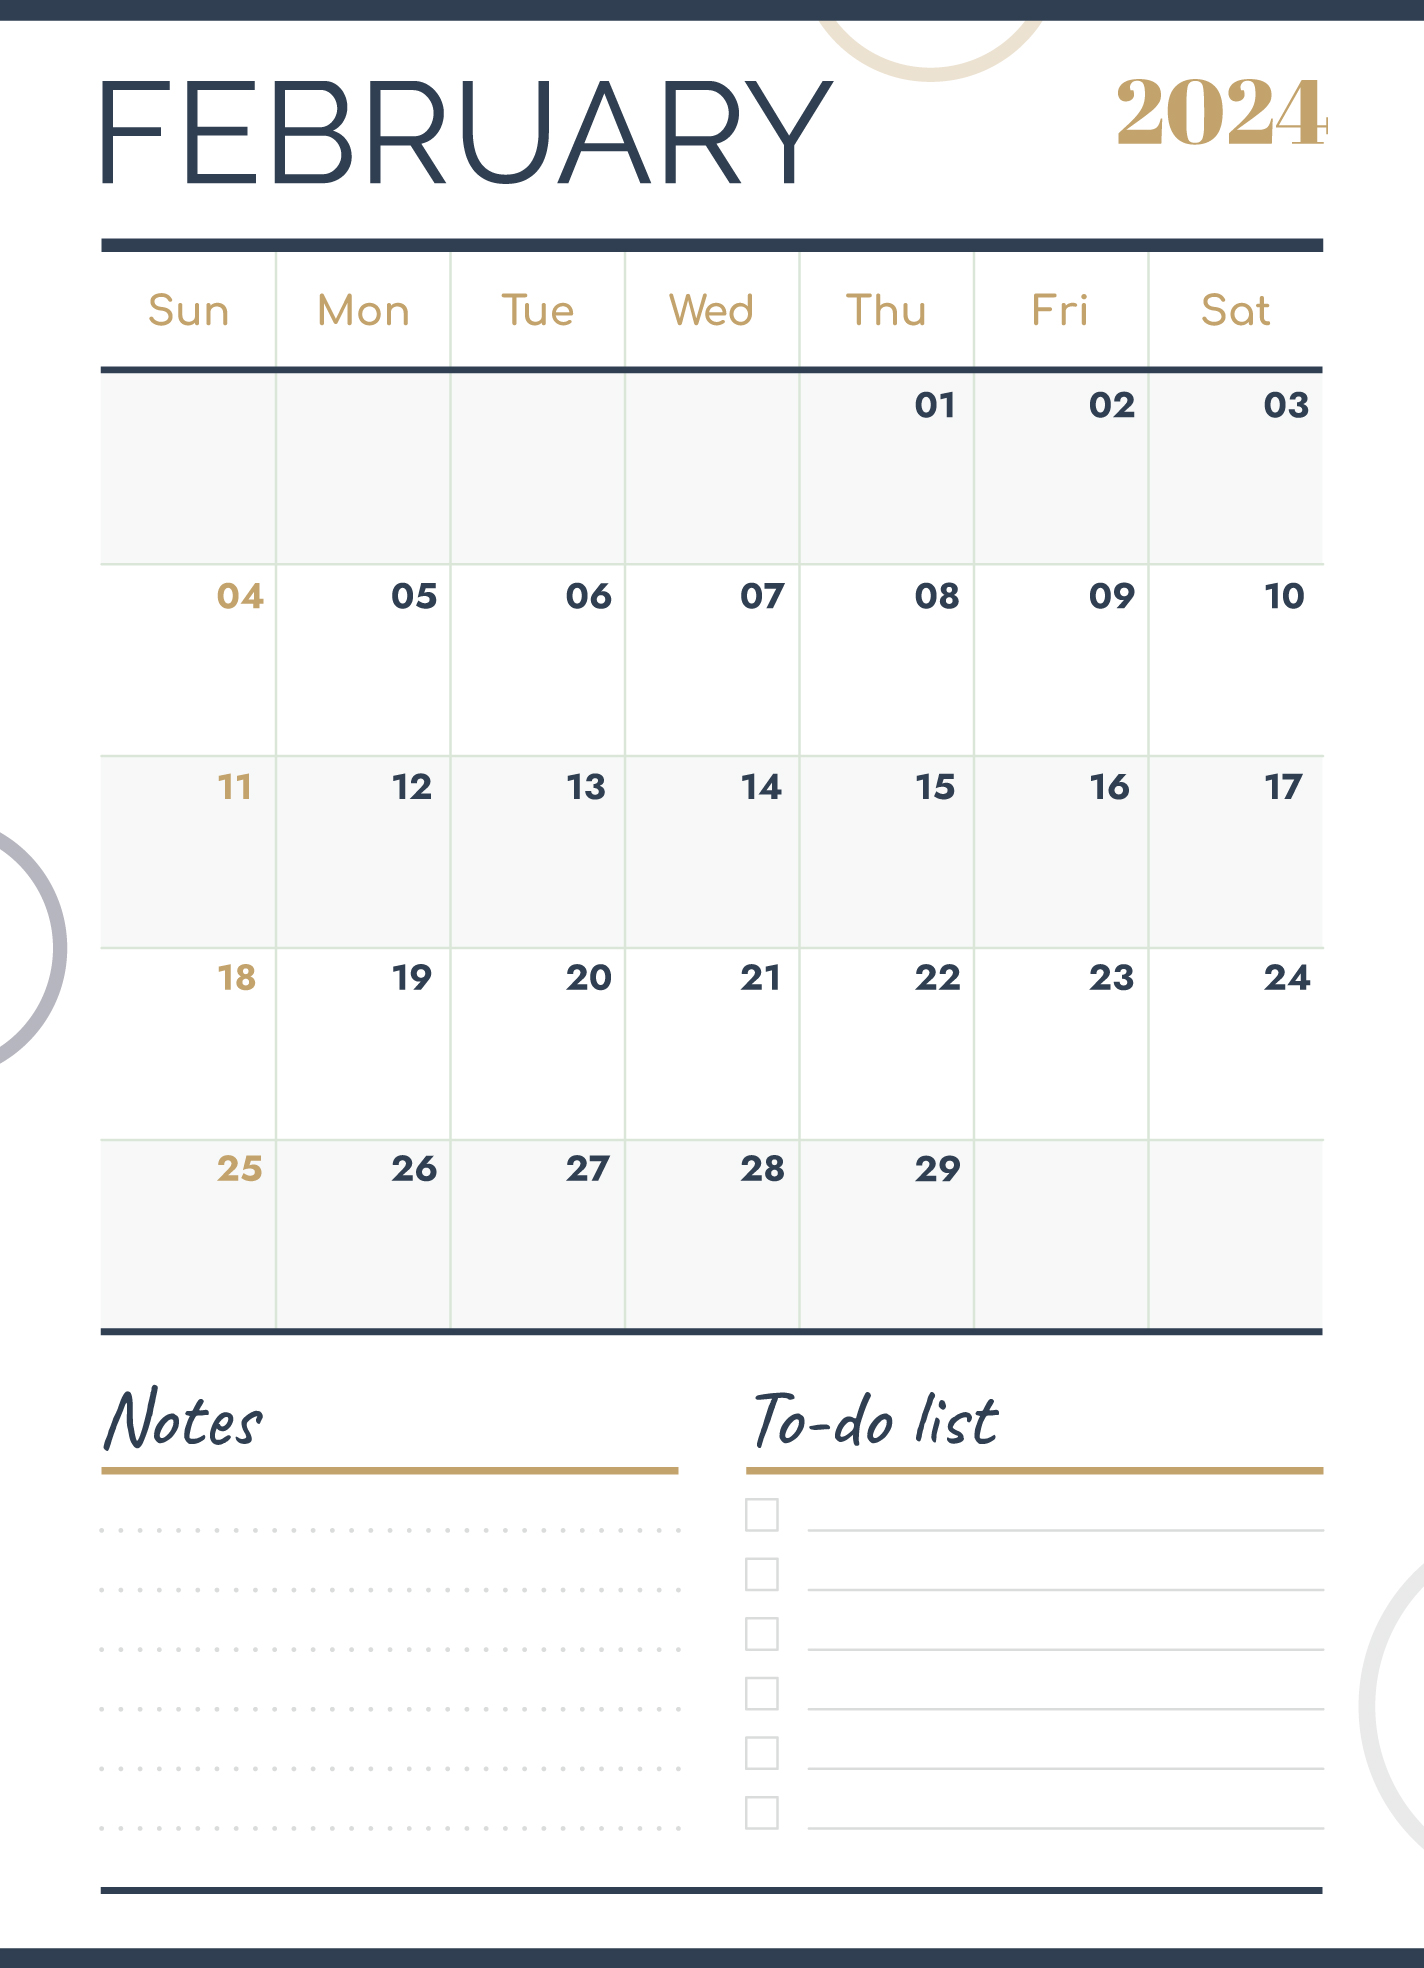 Add Reminders And Notes To My February 2024 Calendar Free Online